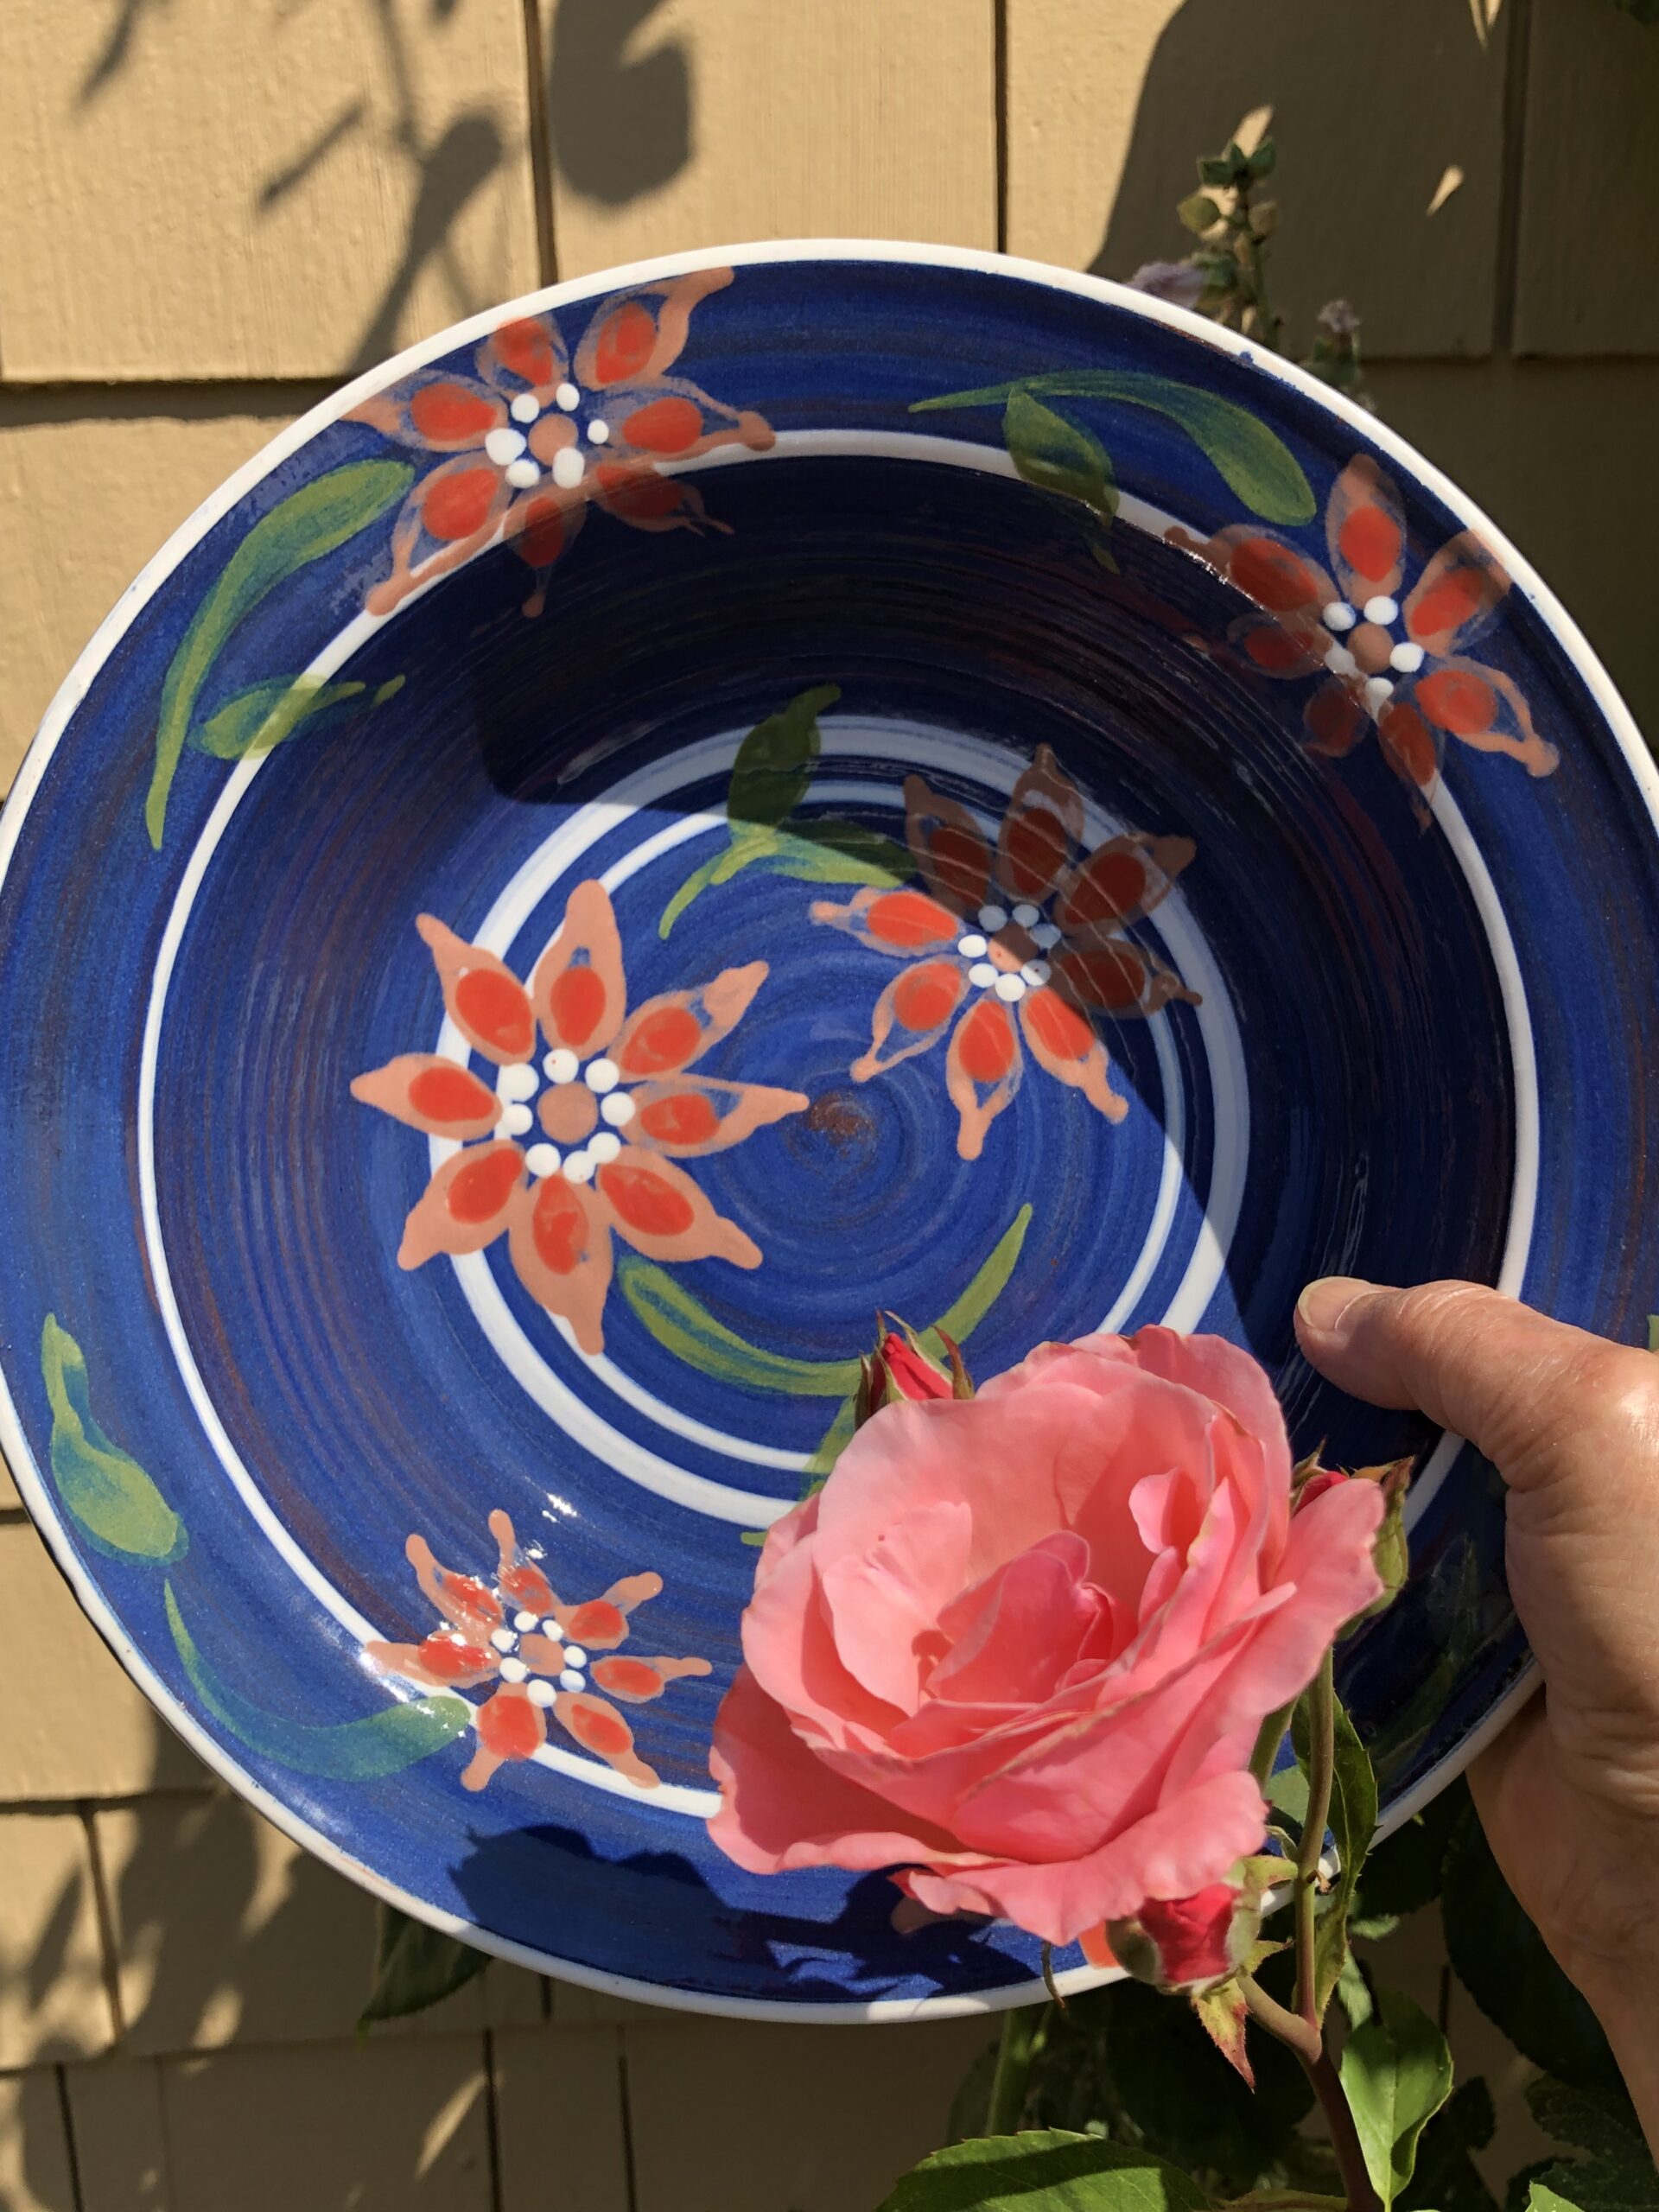 Read more about the article Particular Patterns on Plates